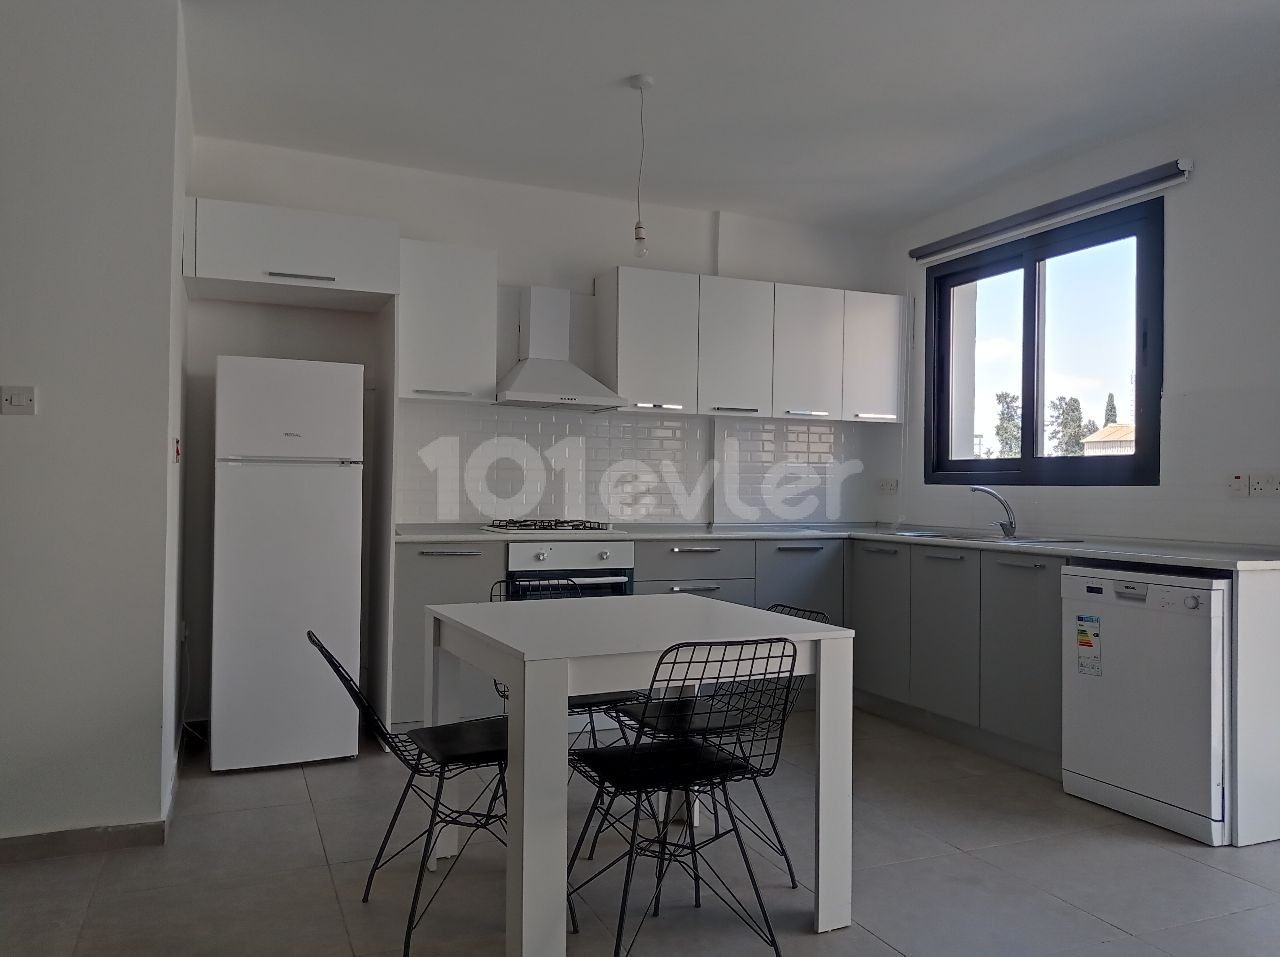 2 + 1 Furnished apartment for rent with indoor parking in the central location in the Yenişehir region ** 